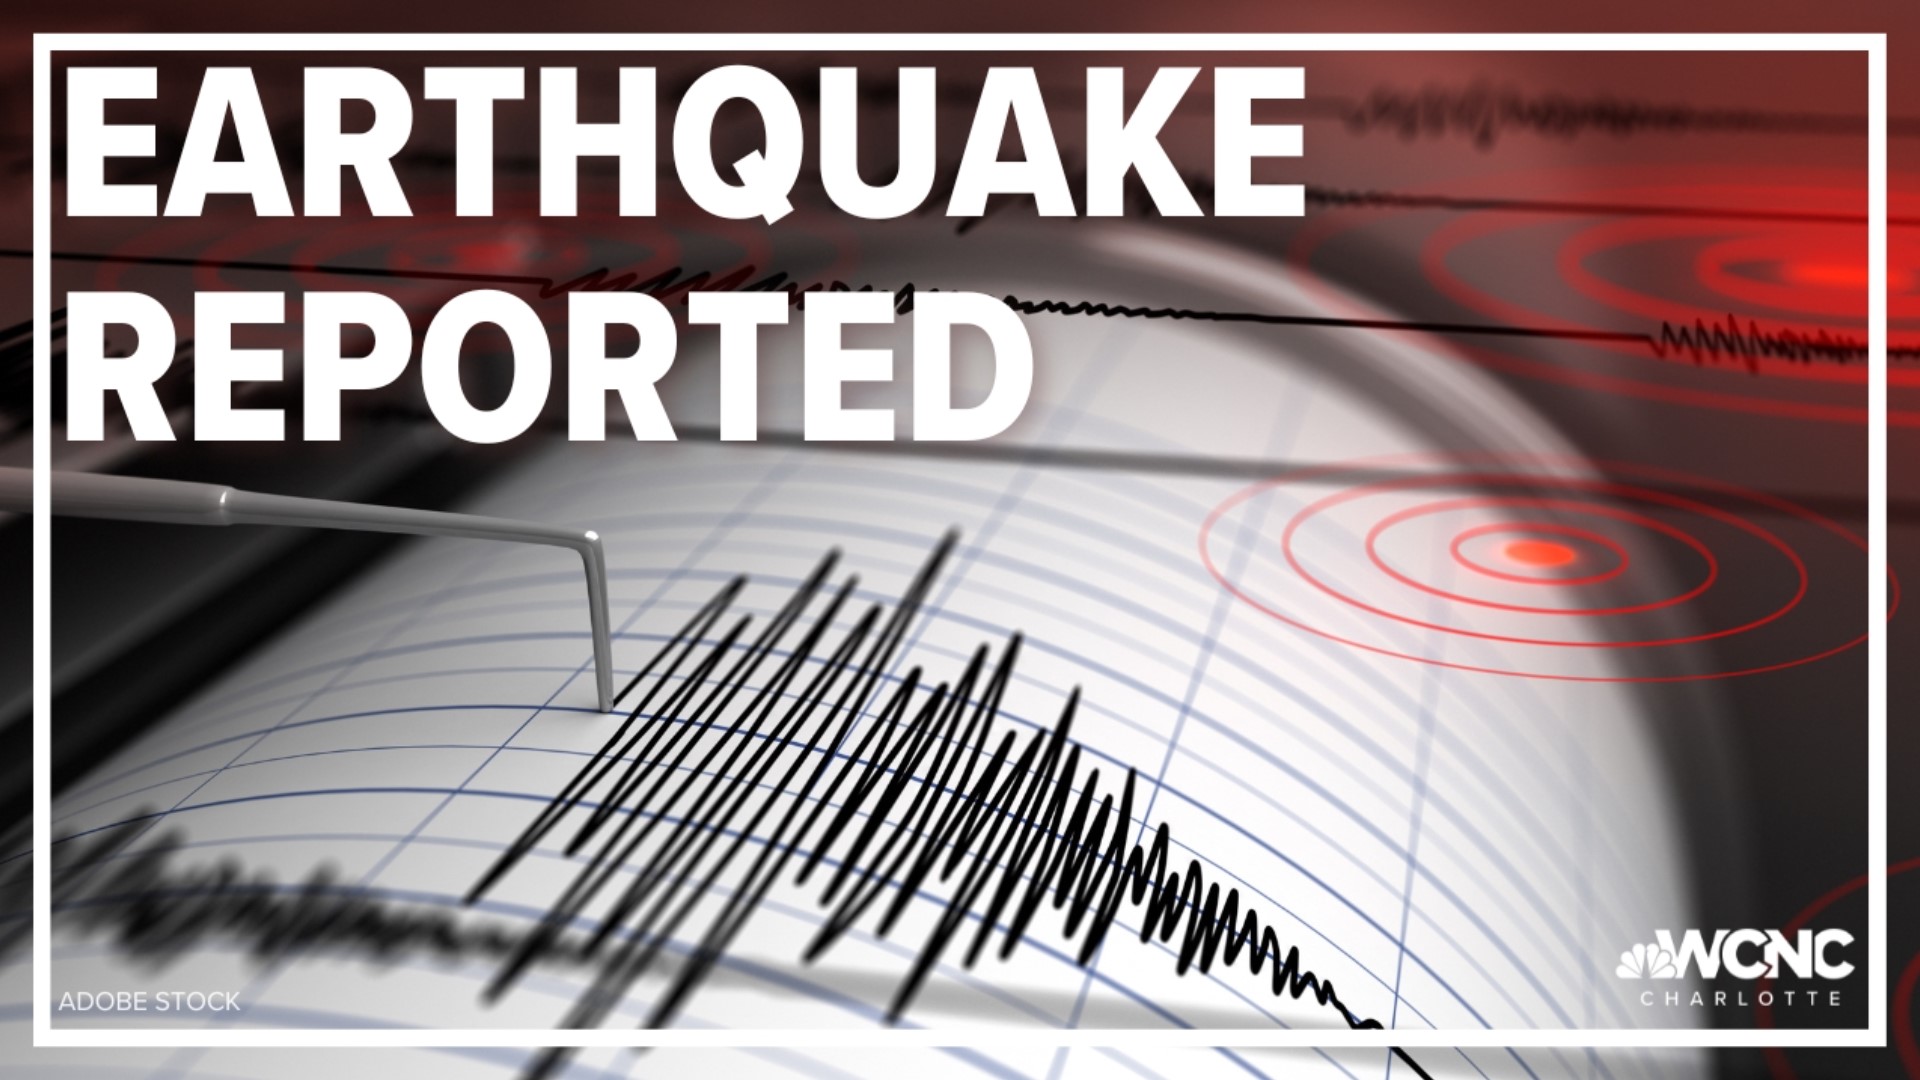 An earthquake was reported Thursday in Canton, which is in western North Carolina in Haywood County near Asheville.